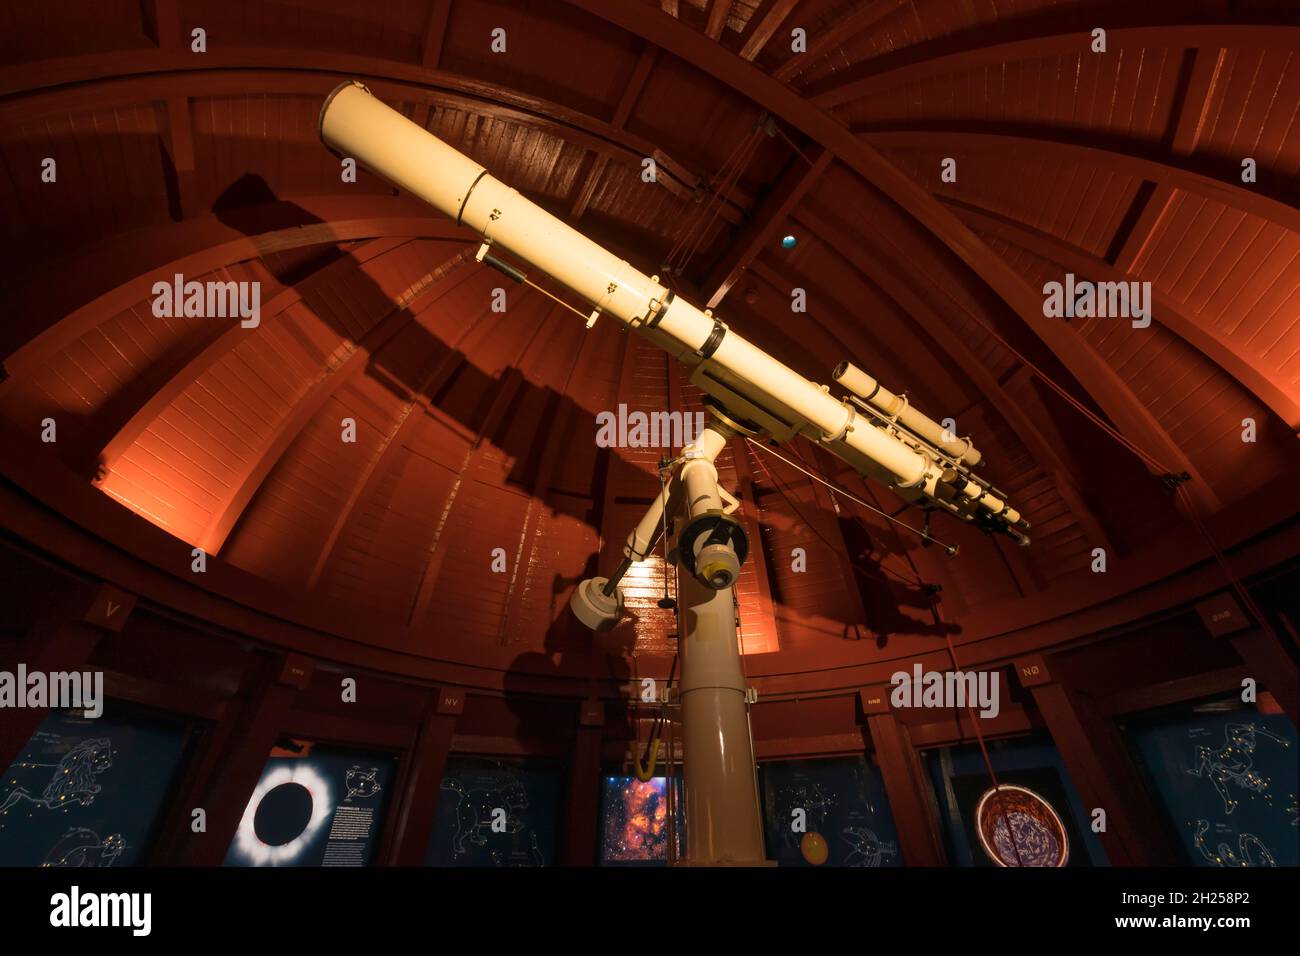 Copenhagen, Denmark – September 21, 2021: The telescope in the observatory dome on top of the Round Tower or Rundetaarn. Stock Photo